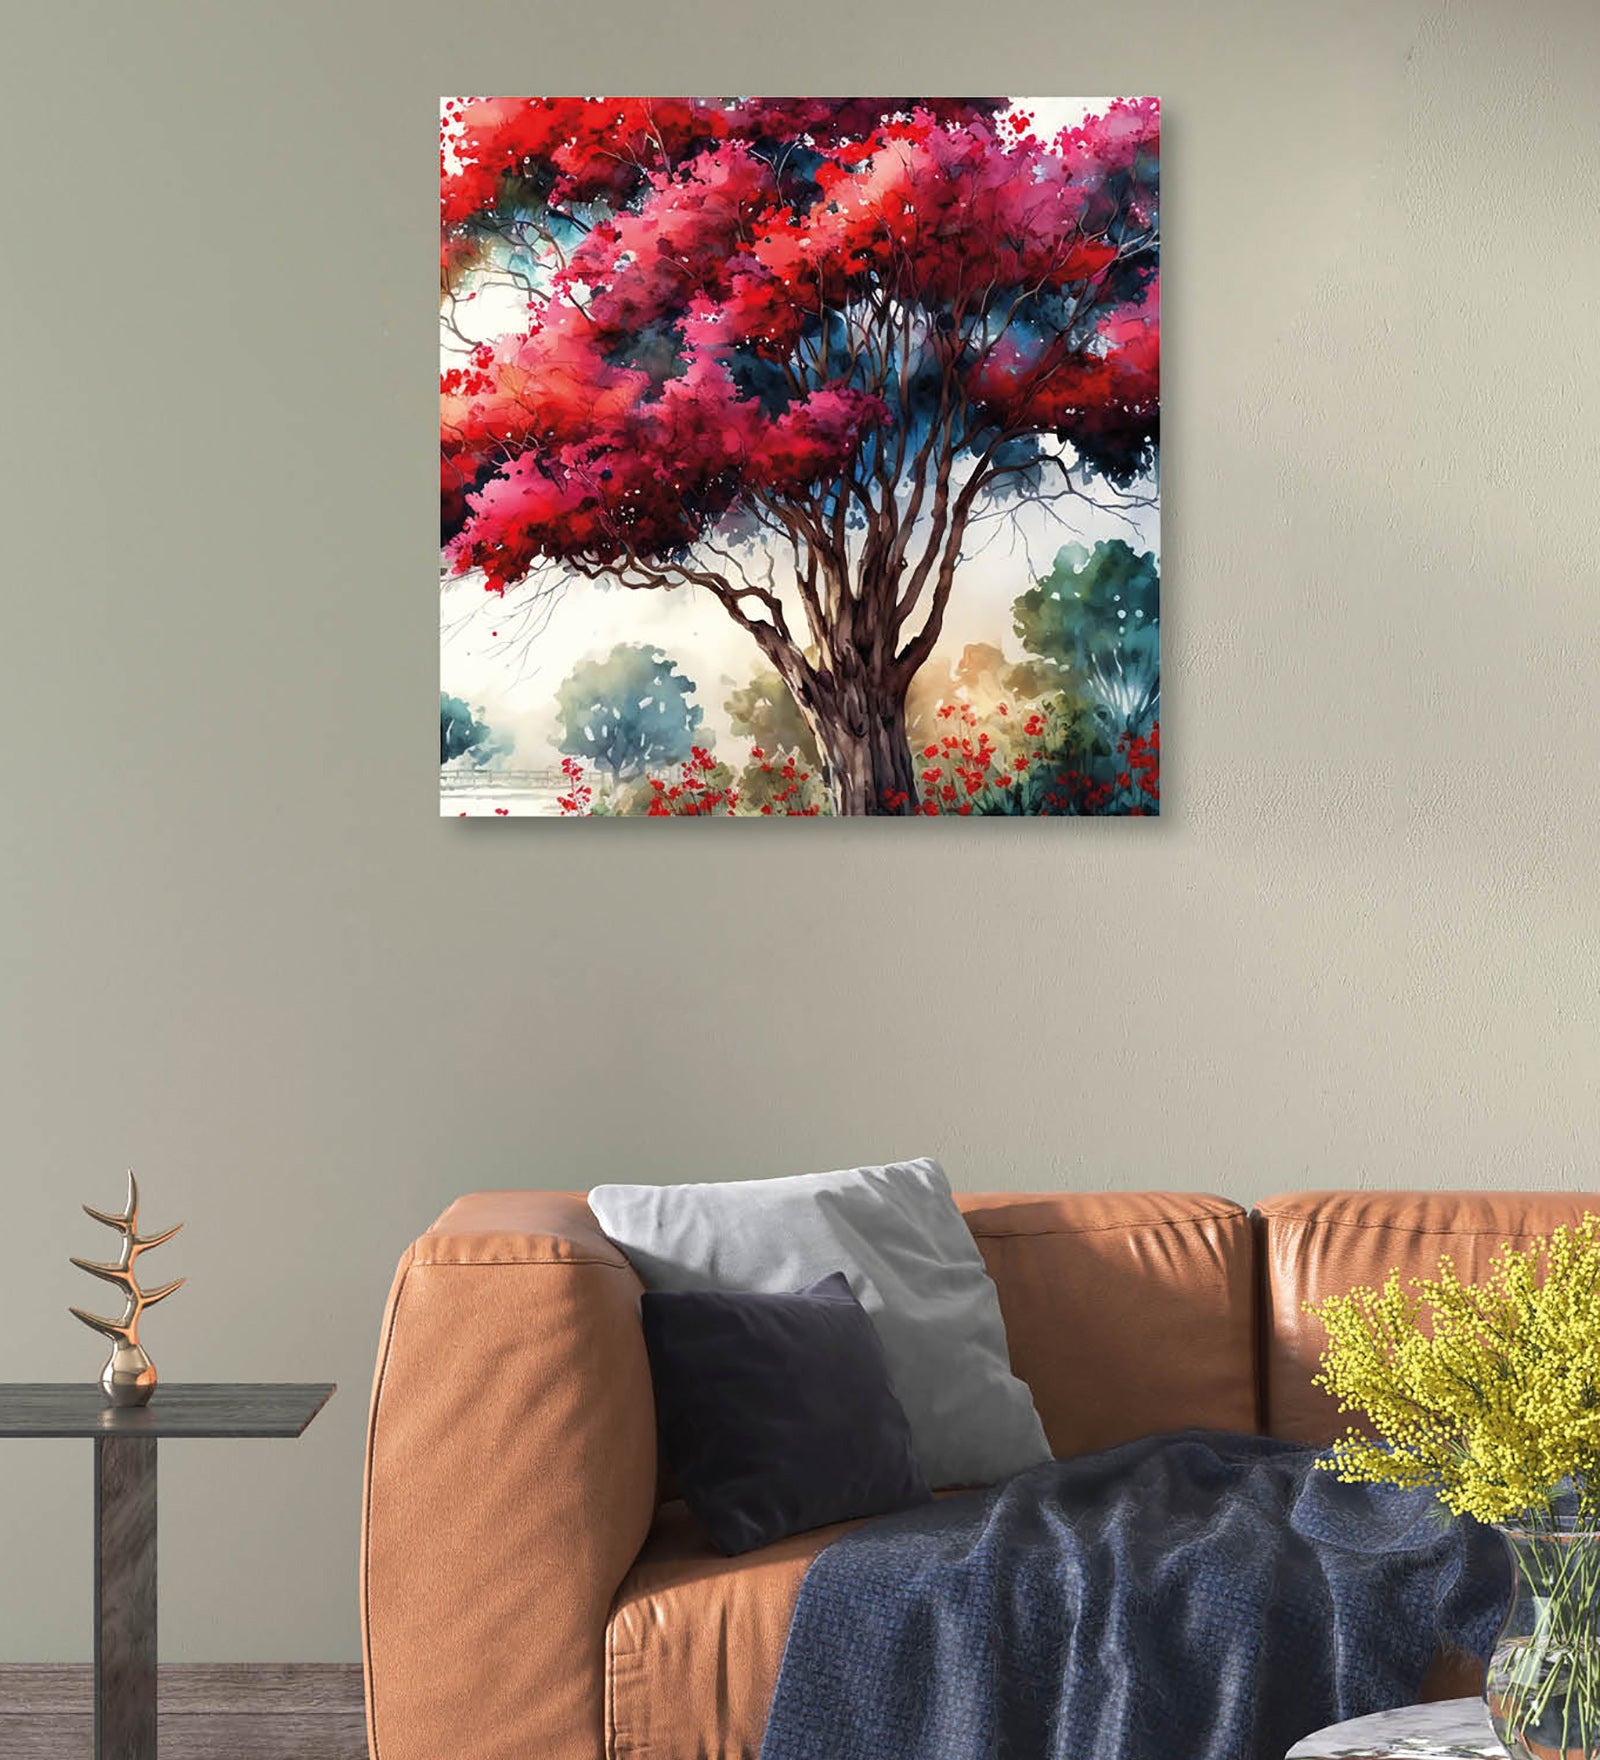 Whispers of Change: A Red Tree Embraces the Hues of Autumn